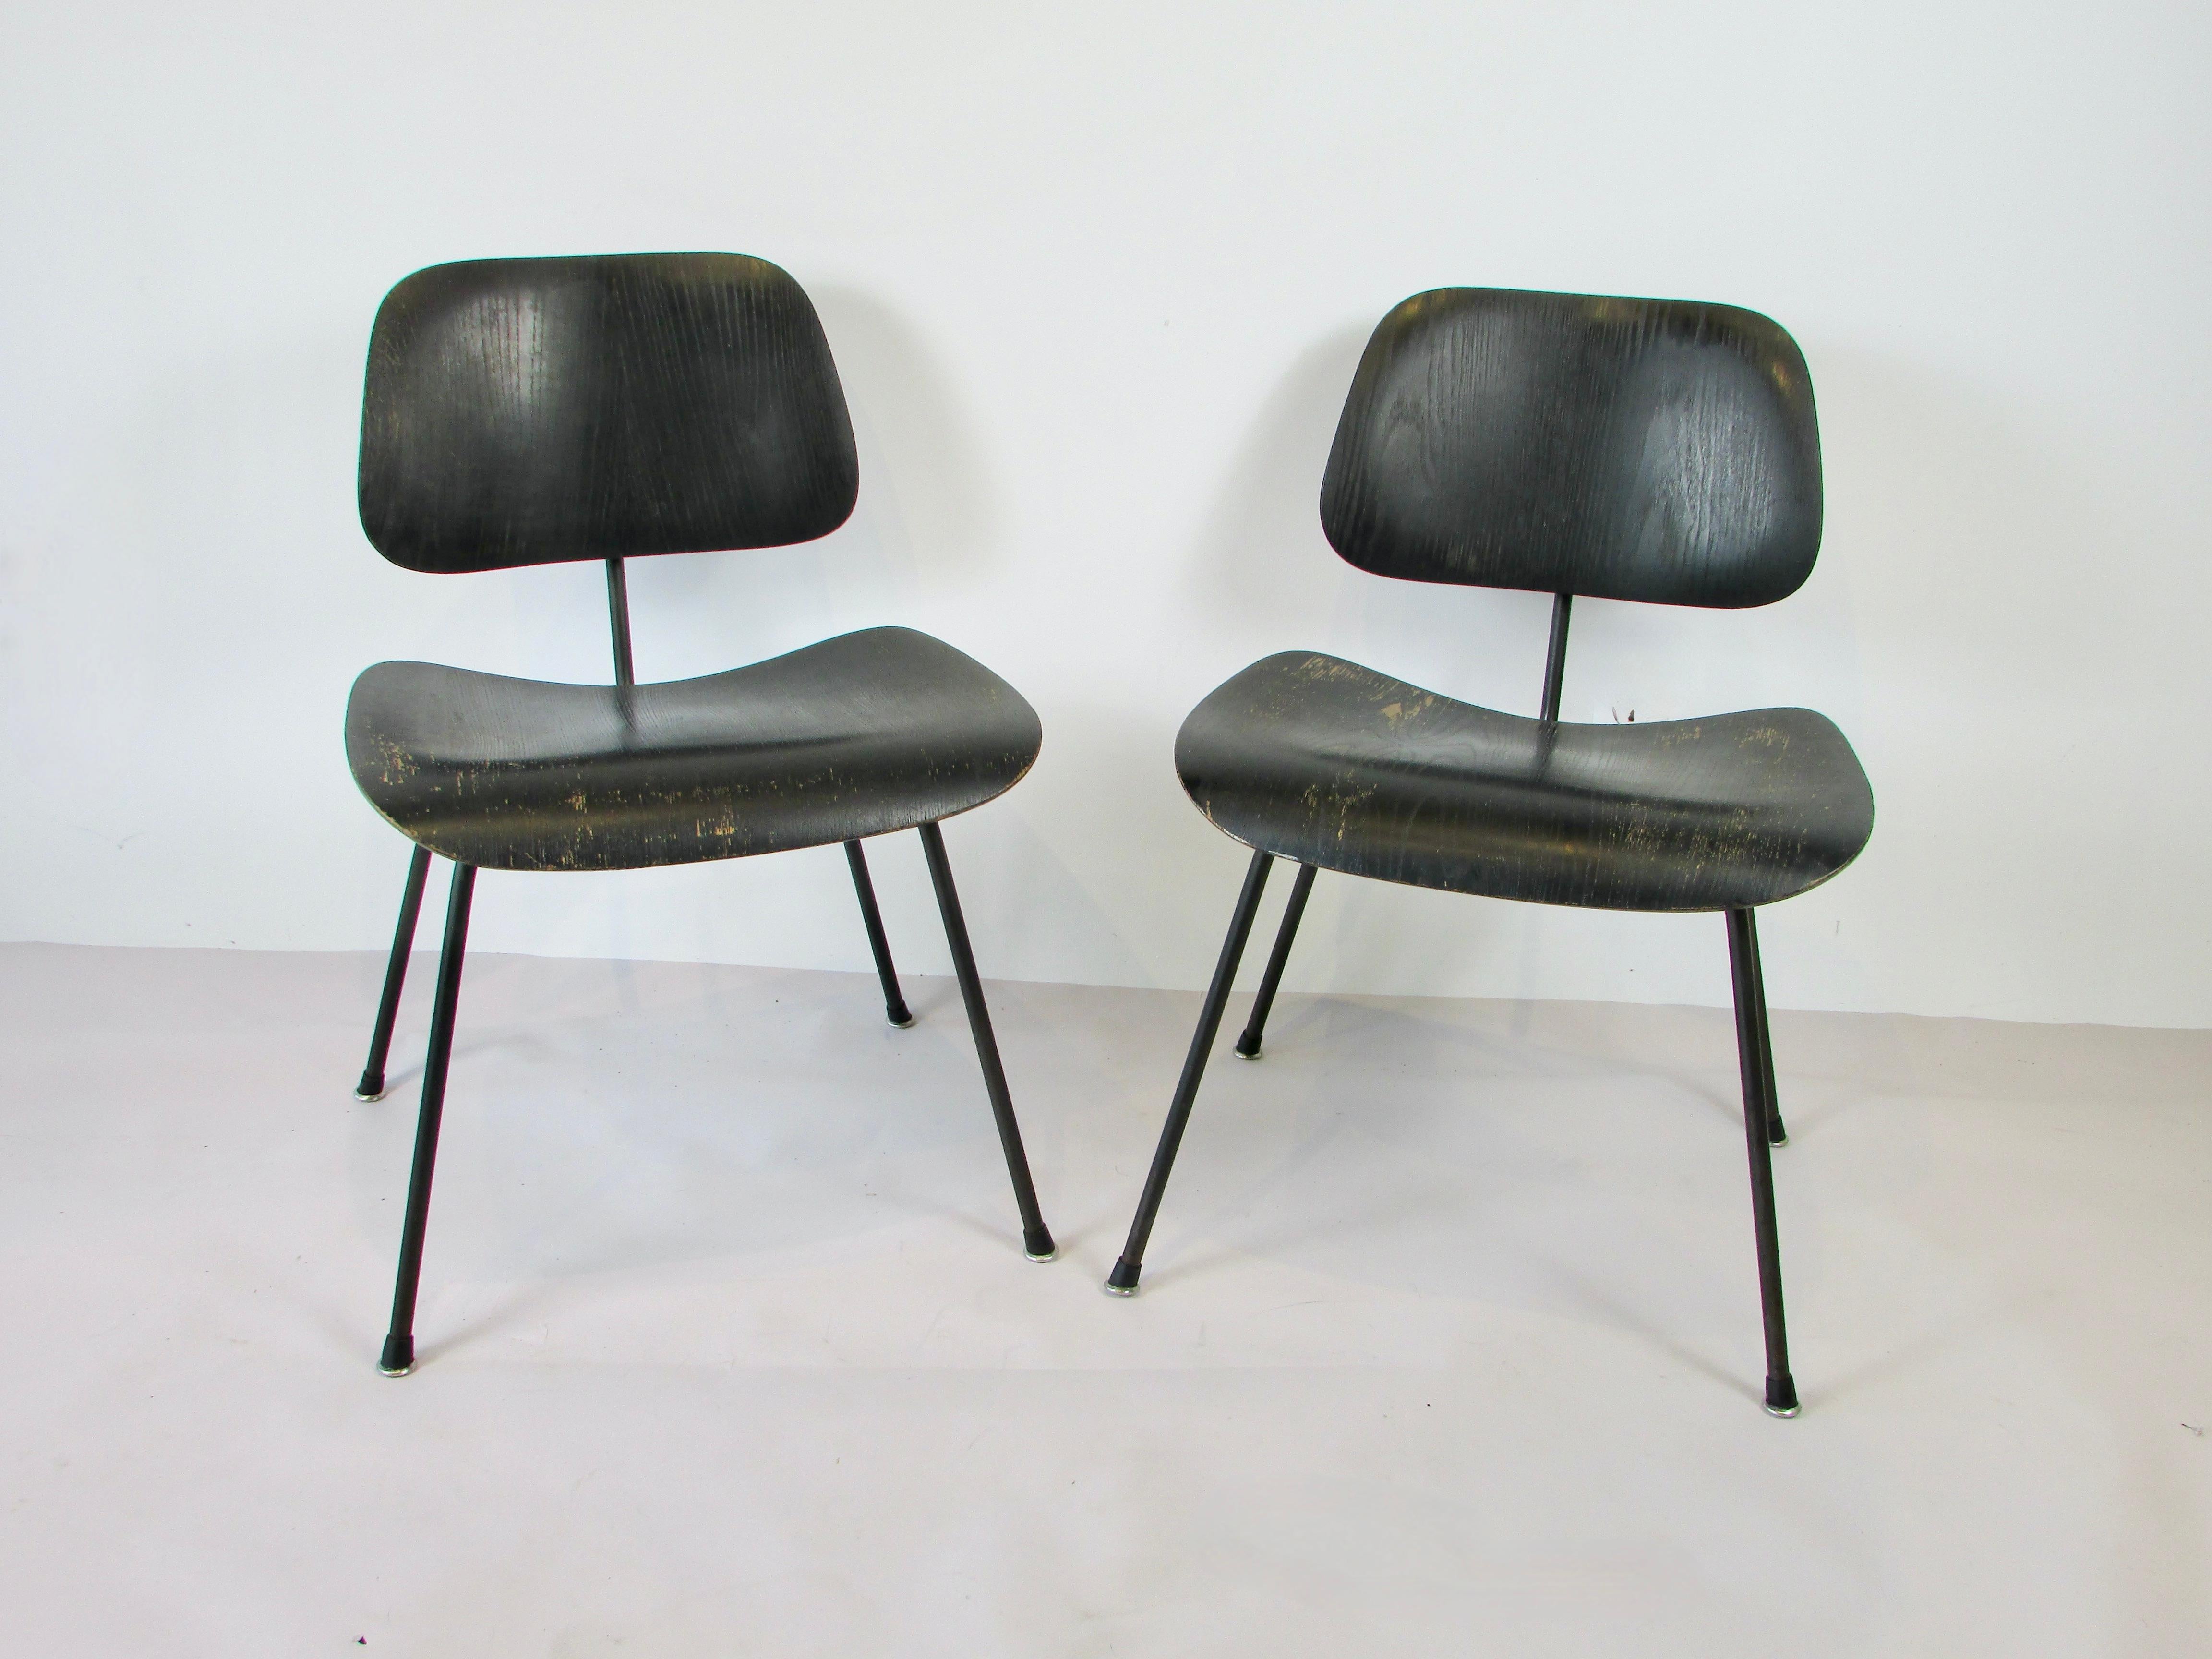 Pair of early production Dining Chair Metal DCM designed by the Charles and Ray Eames team . Black wrought iron frames support black aniline dyed wood seats and backs. Finish shows wear and age as patina more than anything.